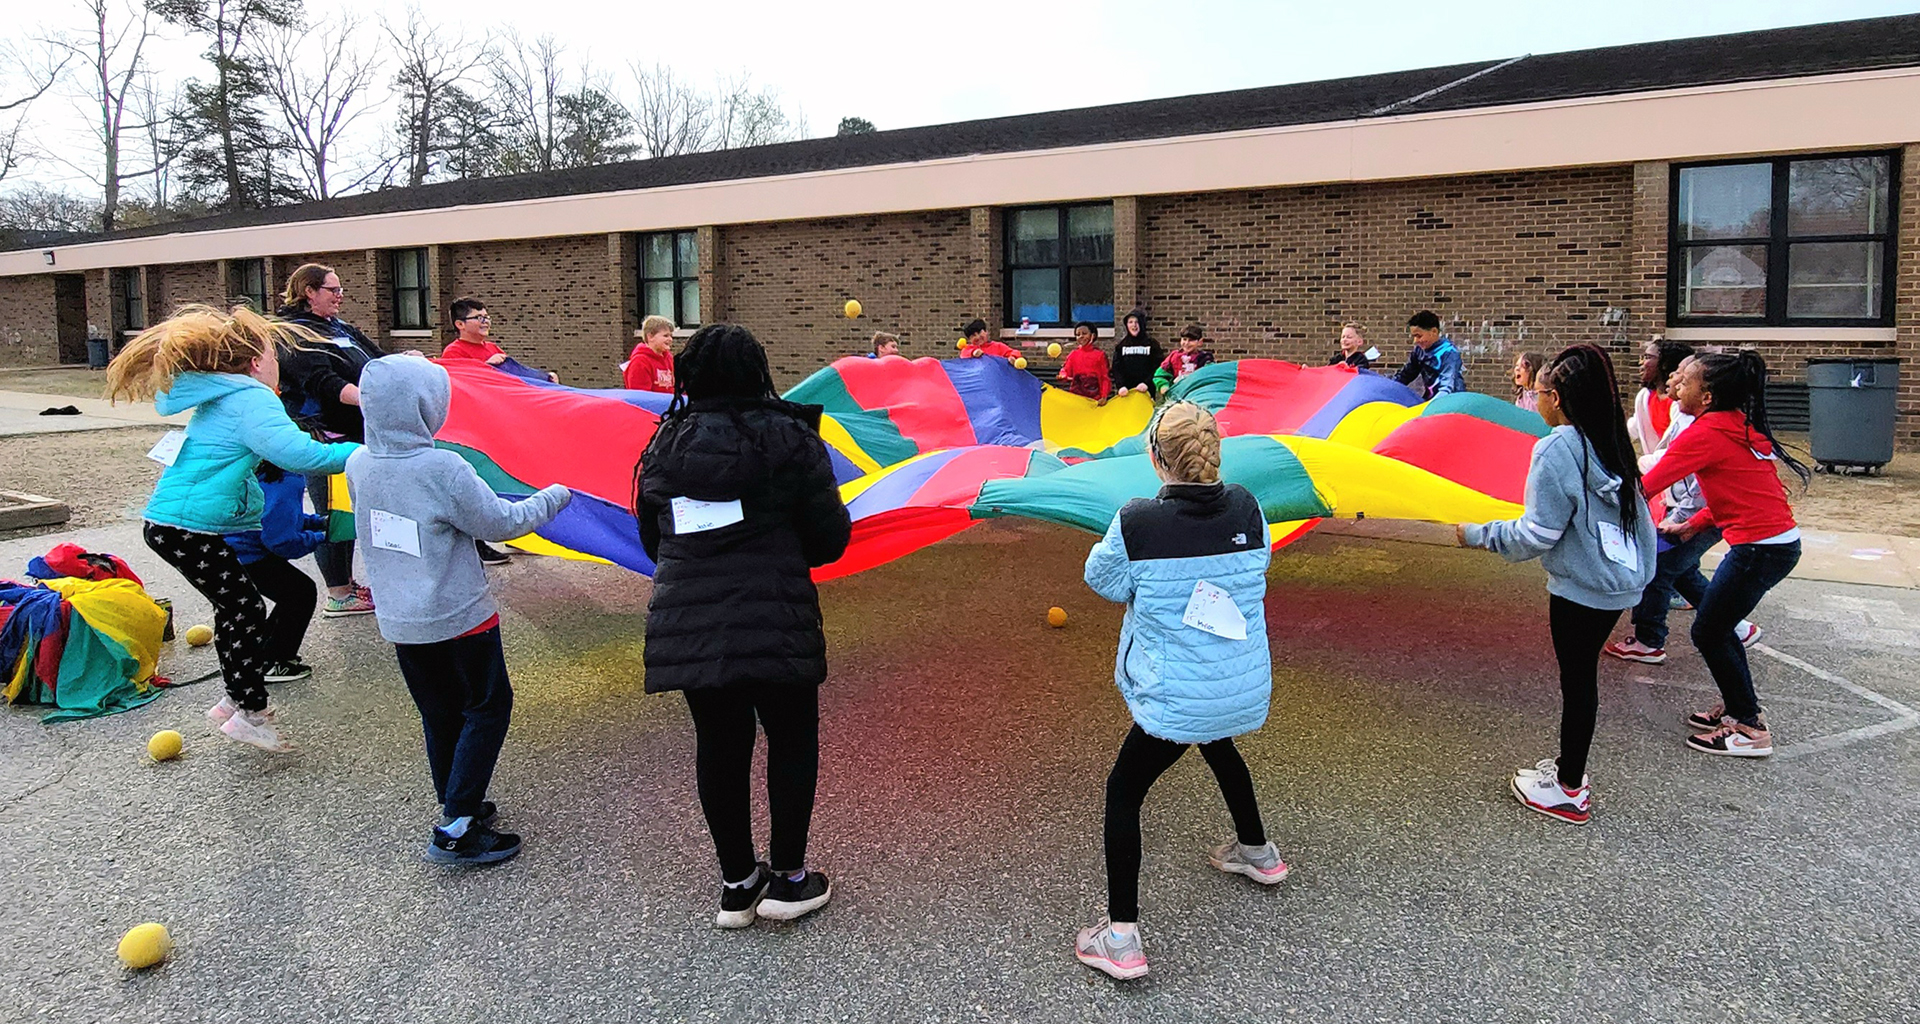 A group of students playing with a large colorful parachute and balls